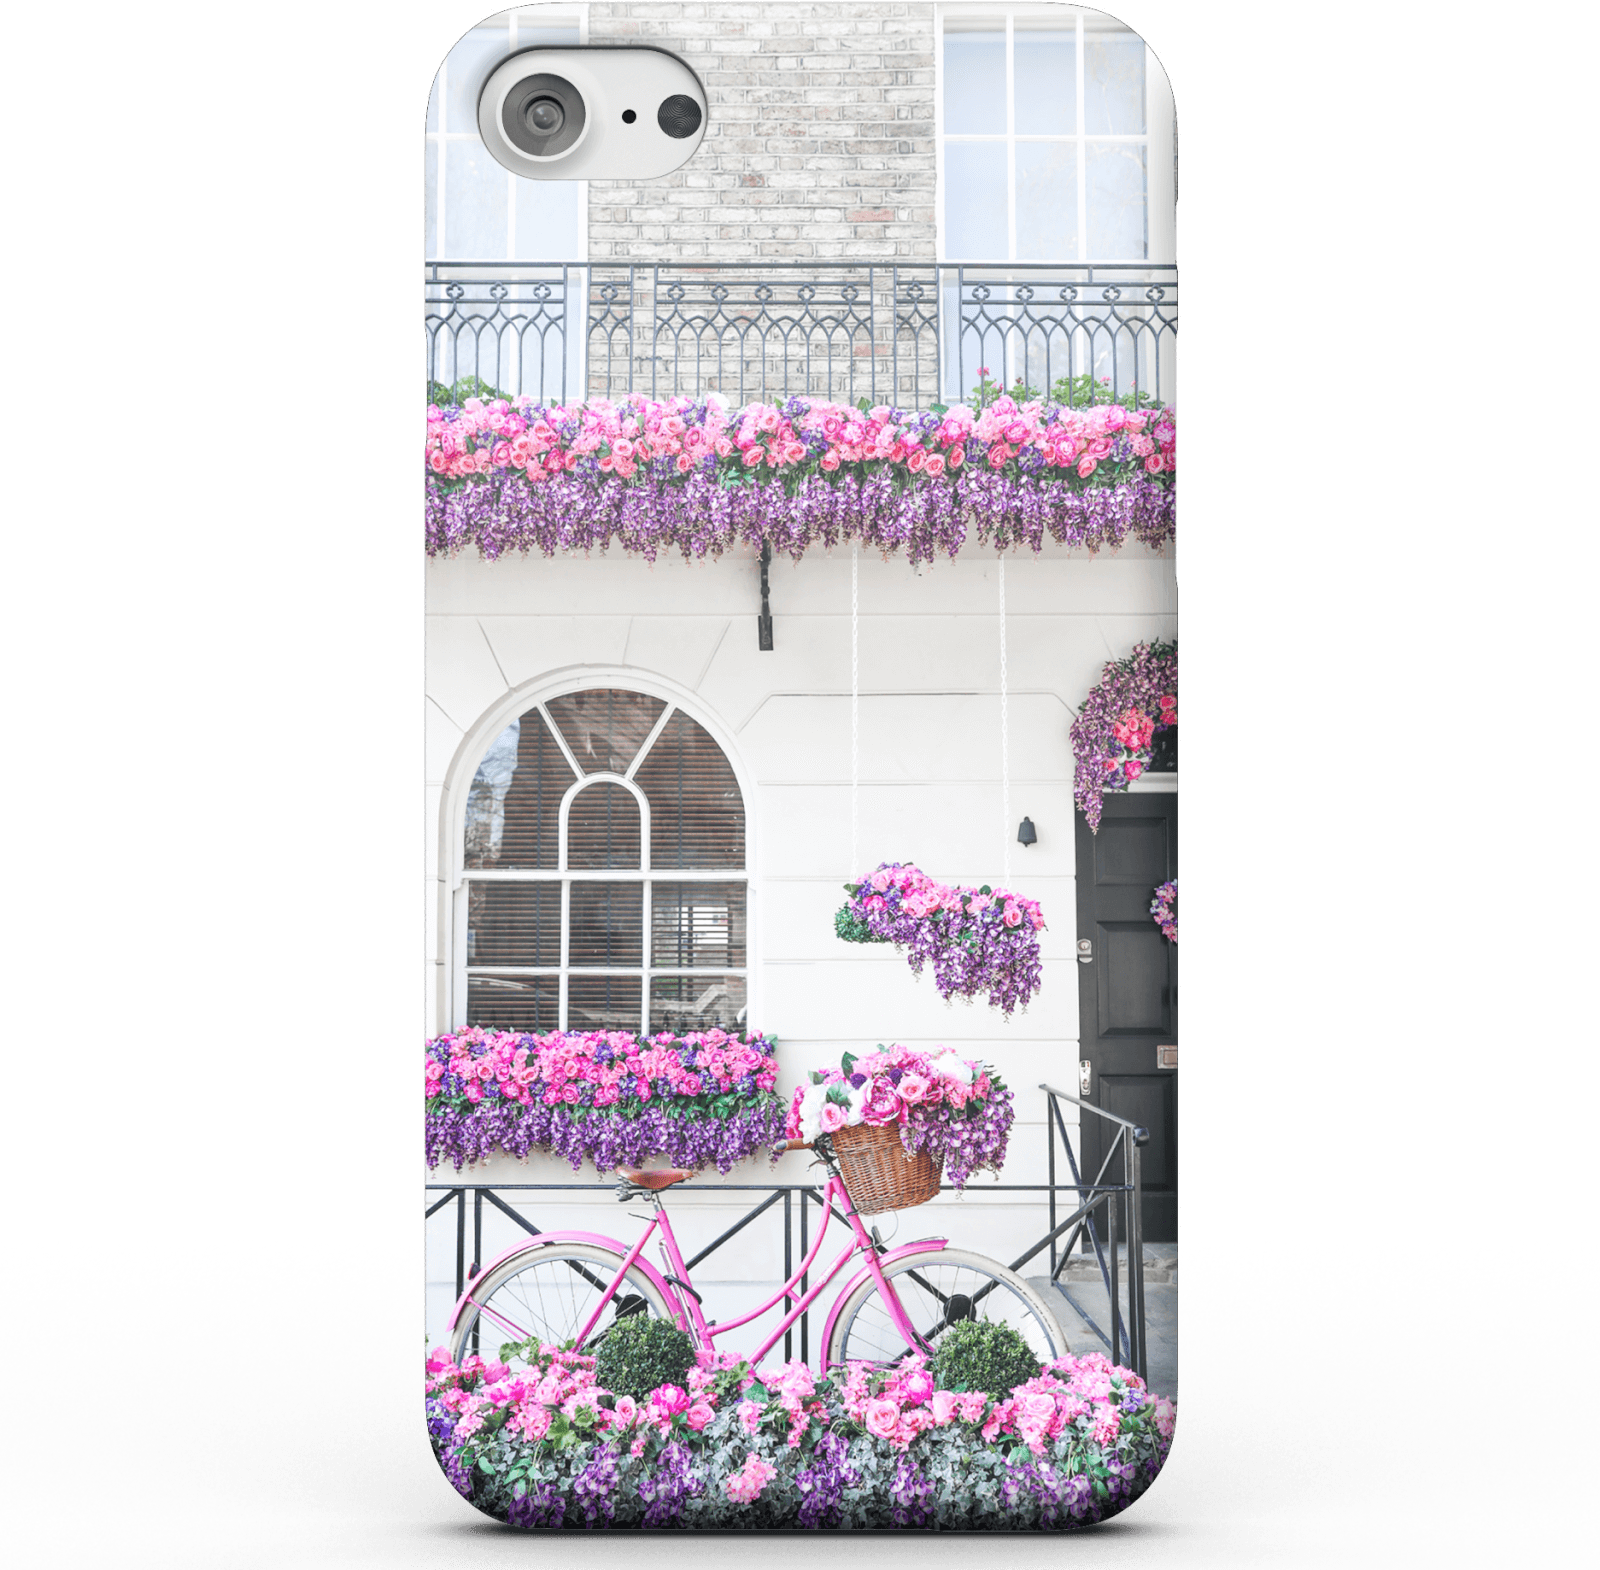 Window Garden Phone Case for iPhone and Android - iPhone 5/5s - Snap Case - Matte